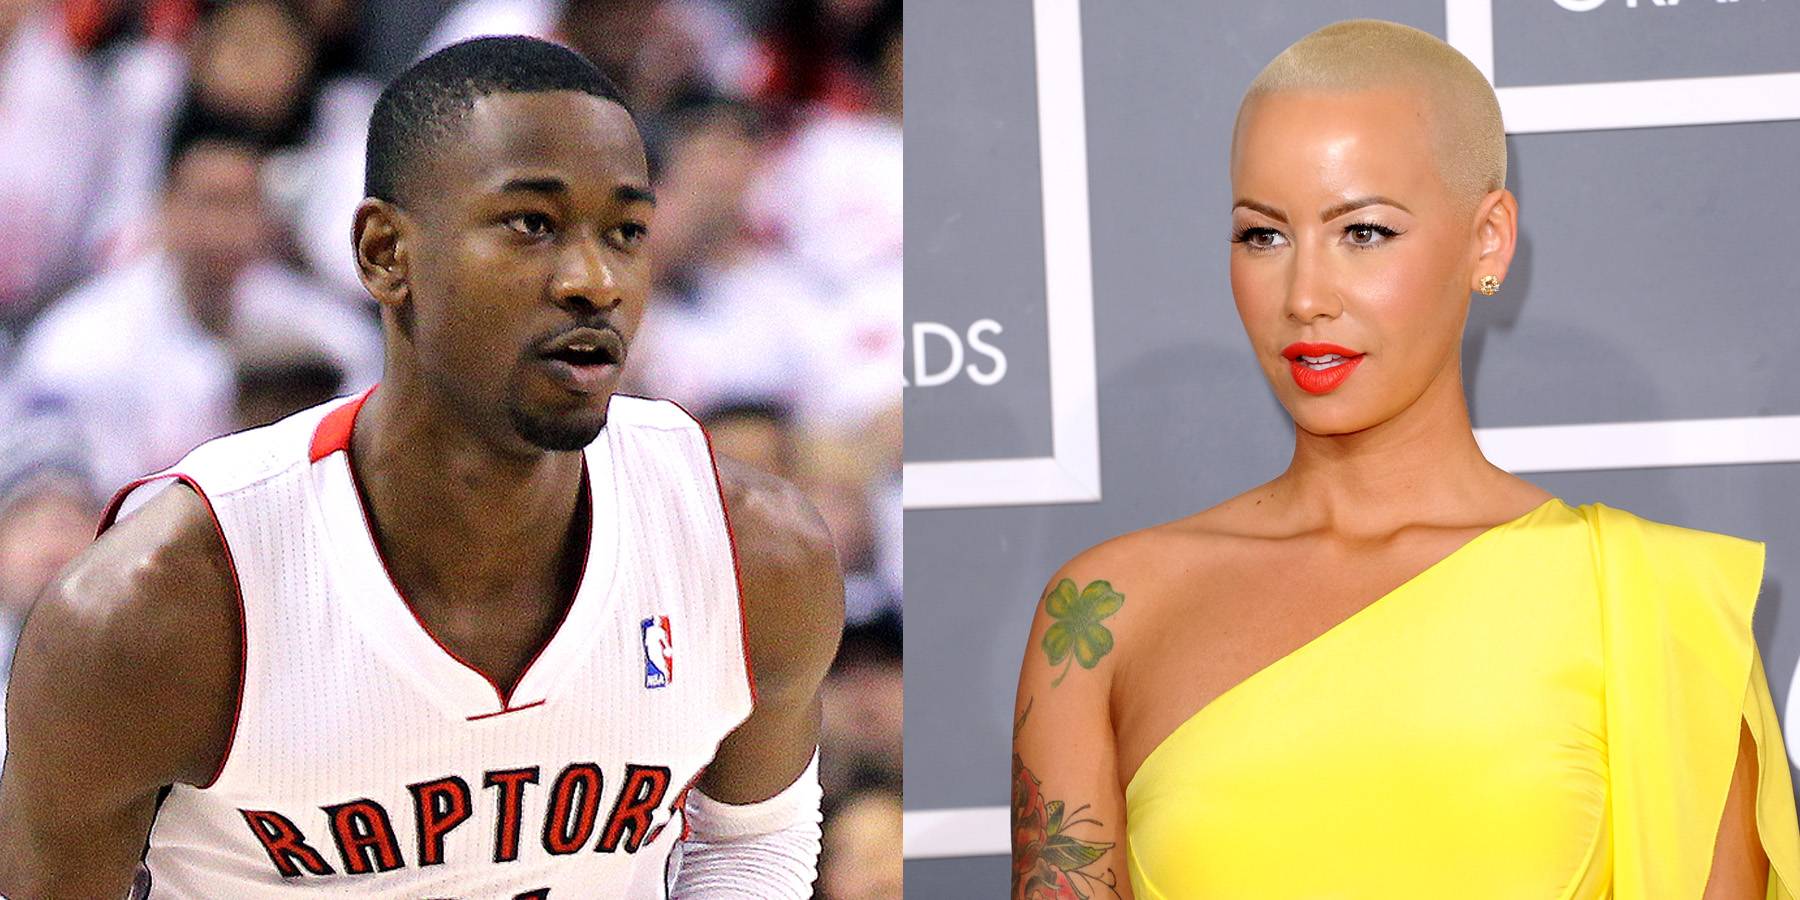 Amber Rose Is Dating Toronto Raptors Basketball Player Terrence Ross